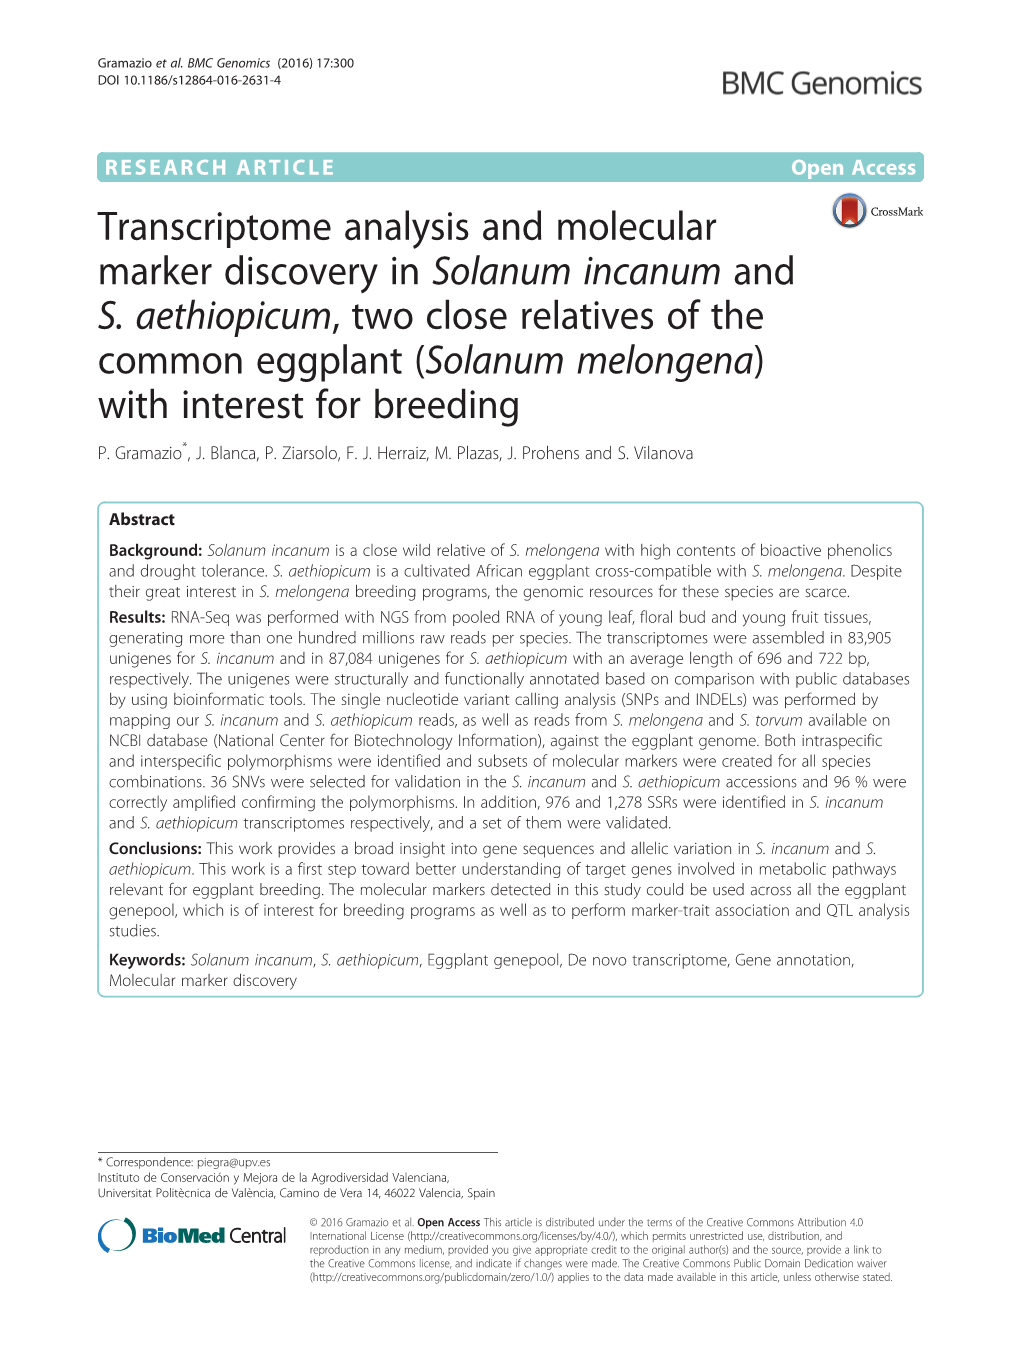 Transcriptome Analysis and Molecular Marker Discovery in Solanum Incanum and S